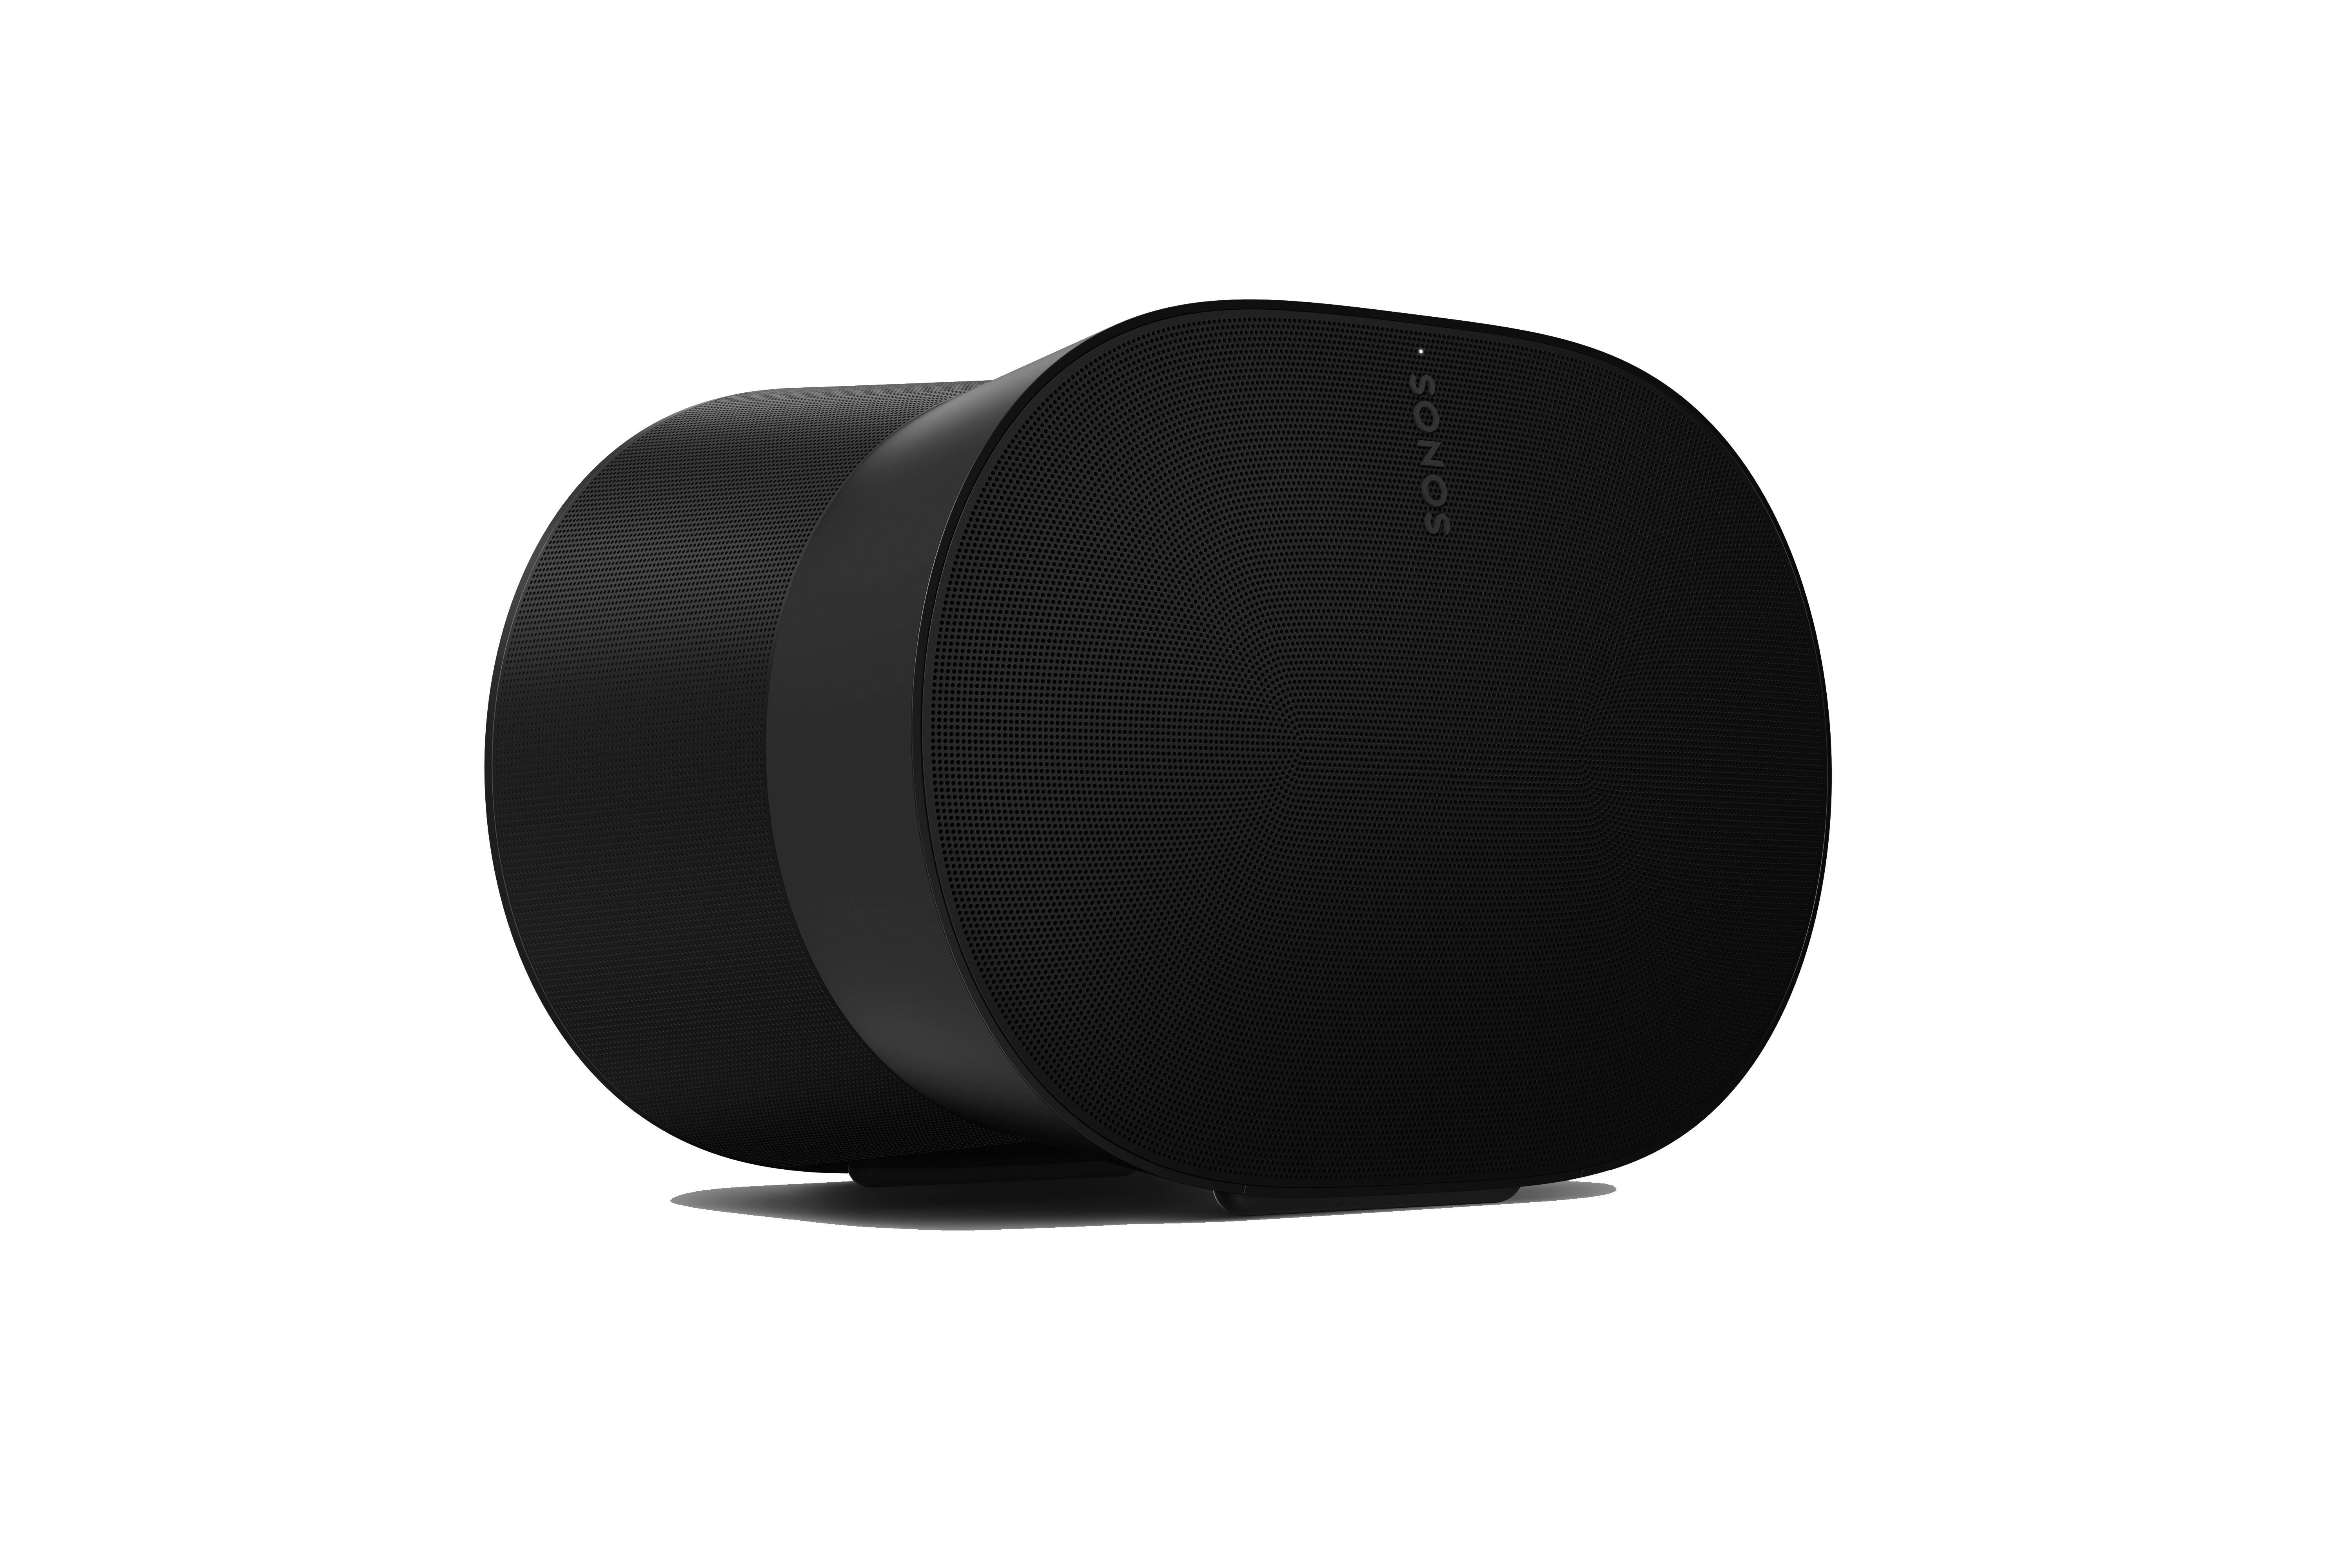 Era 300 from Sonos large dolby atmos capable wifi speaker